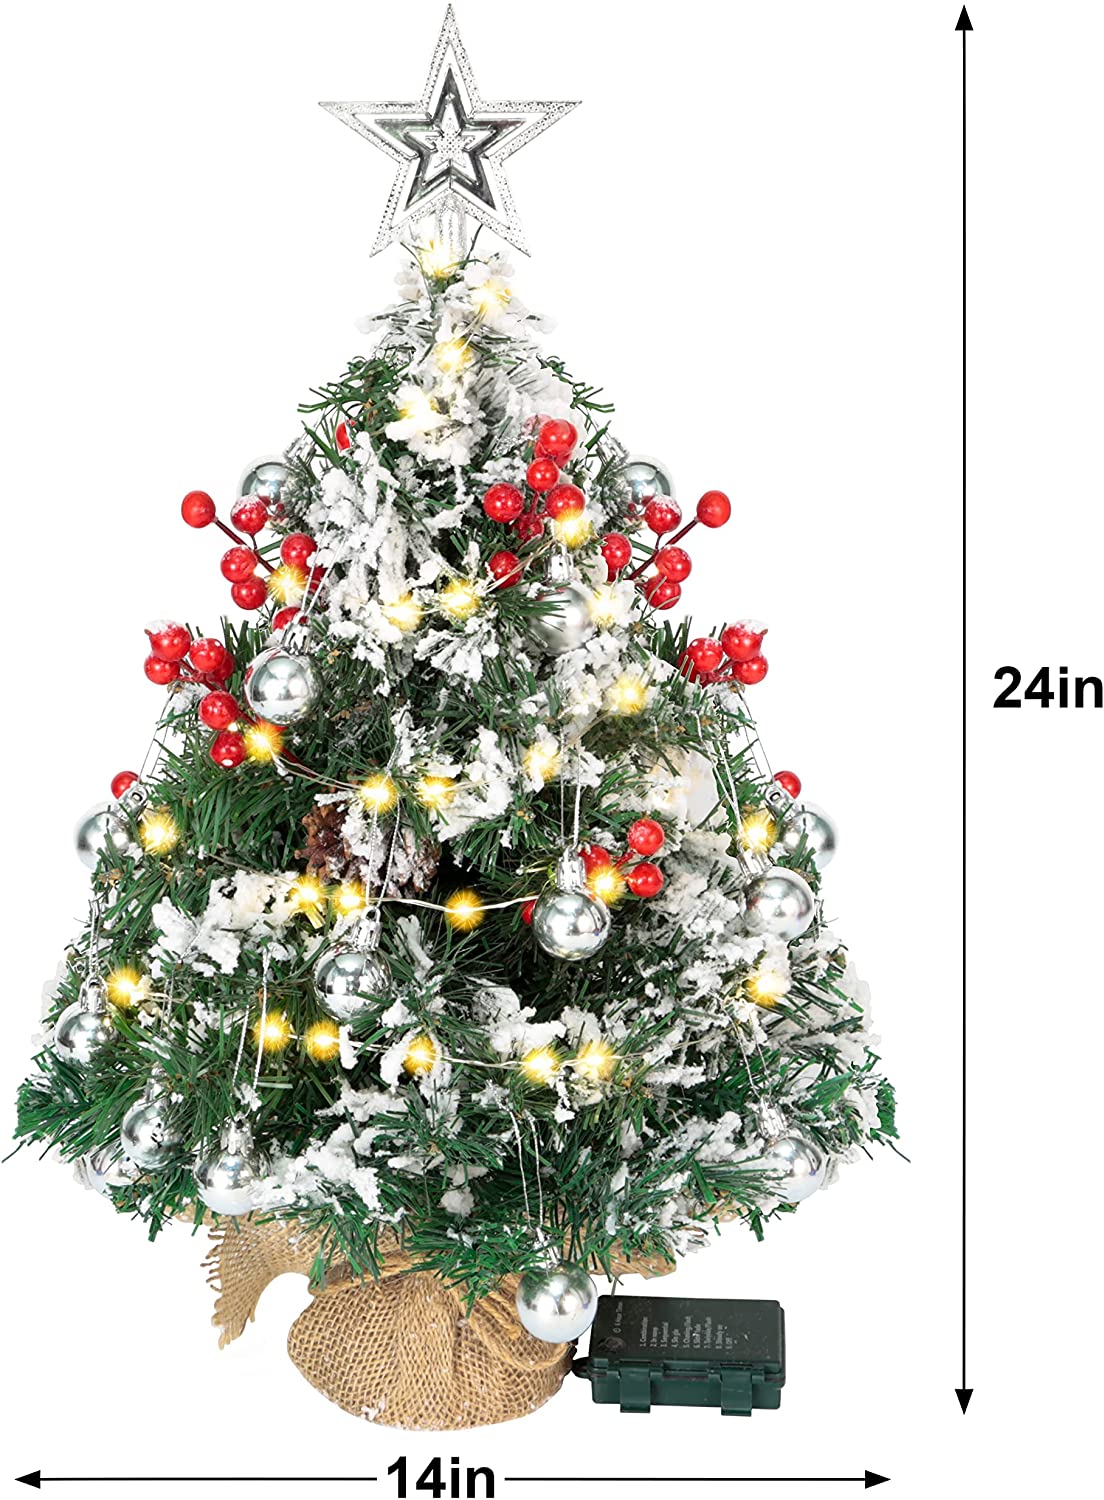 24in Prelit Tabletop Flocked Christmas Tree with 50 Warm White String Lights